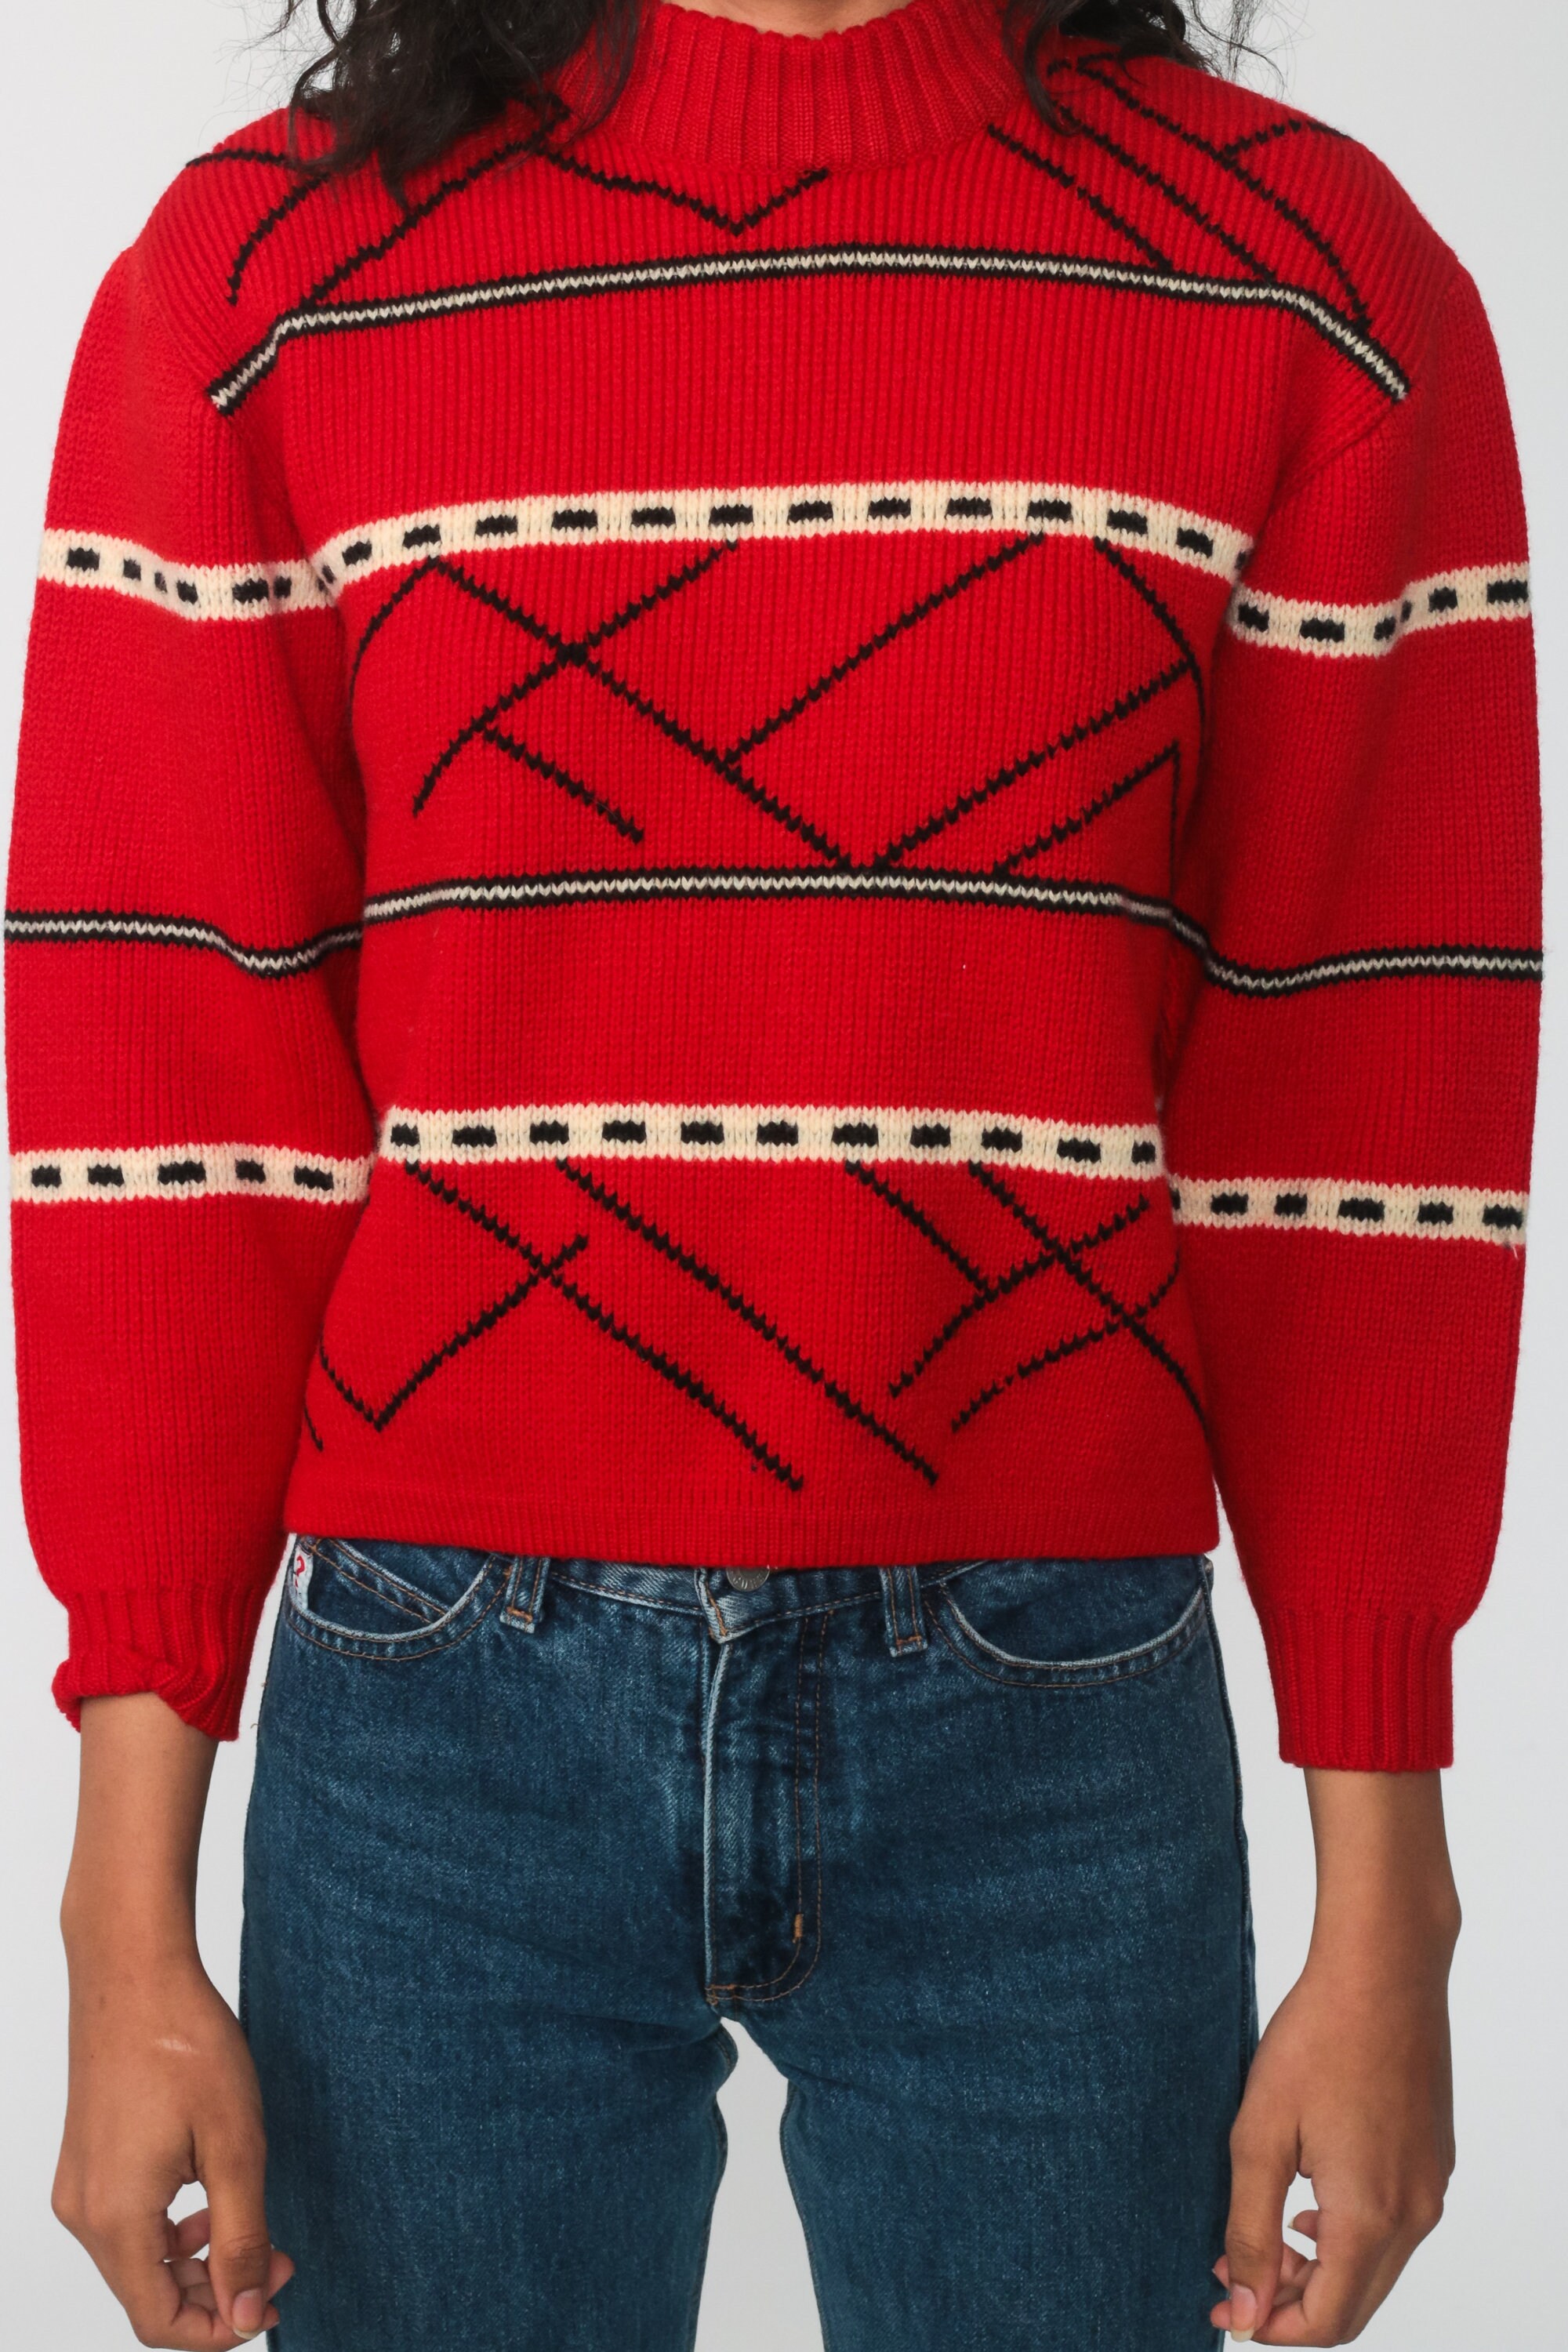 Red Wool Sweater Striped Sweater 80s Knit Slouchy Stripes | Etsy